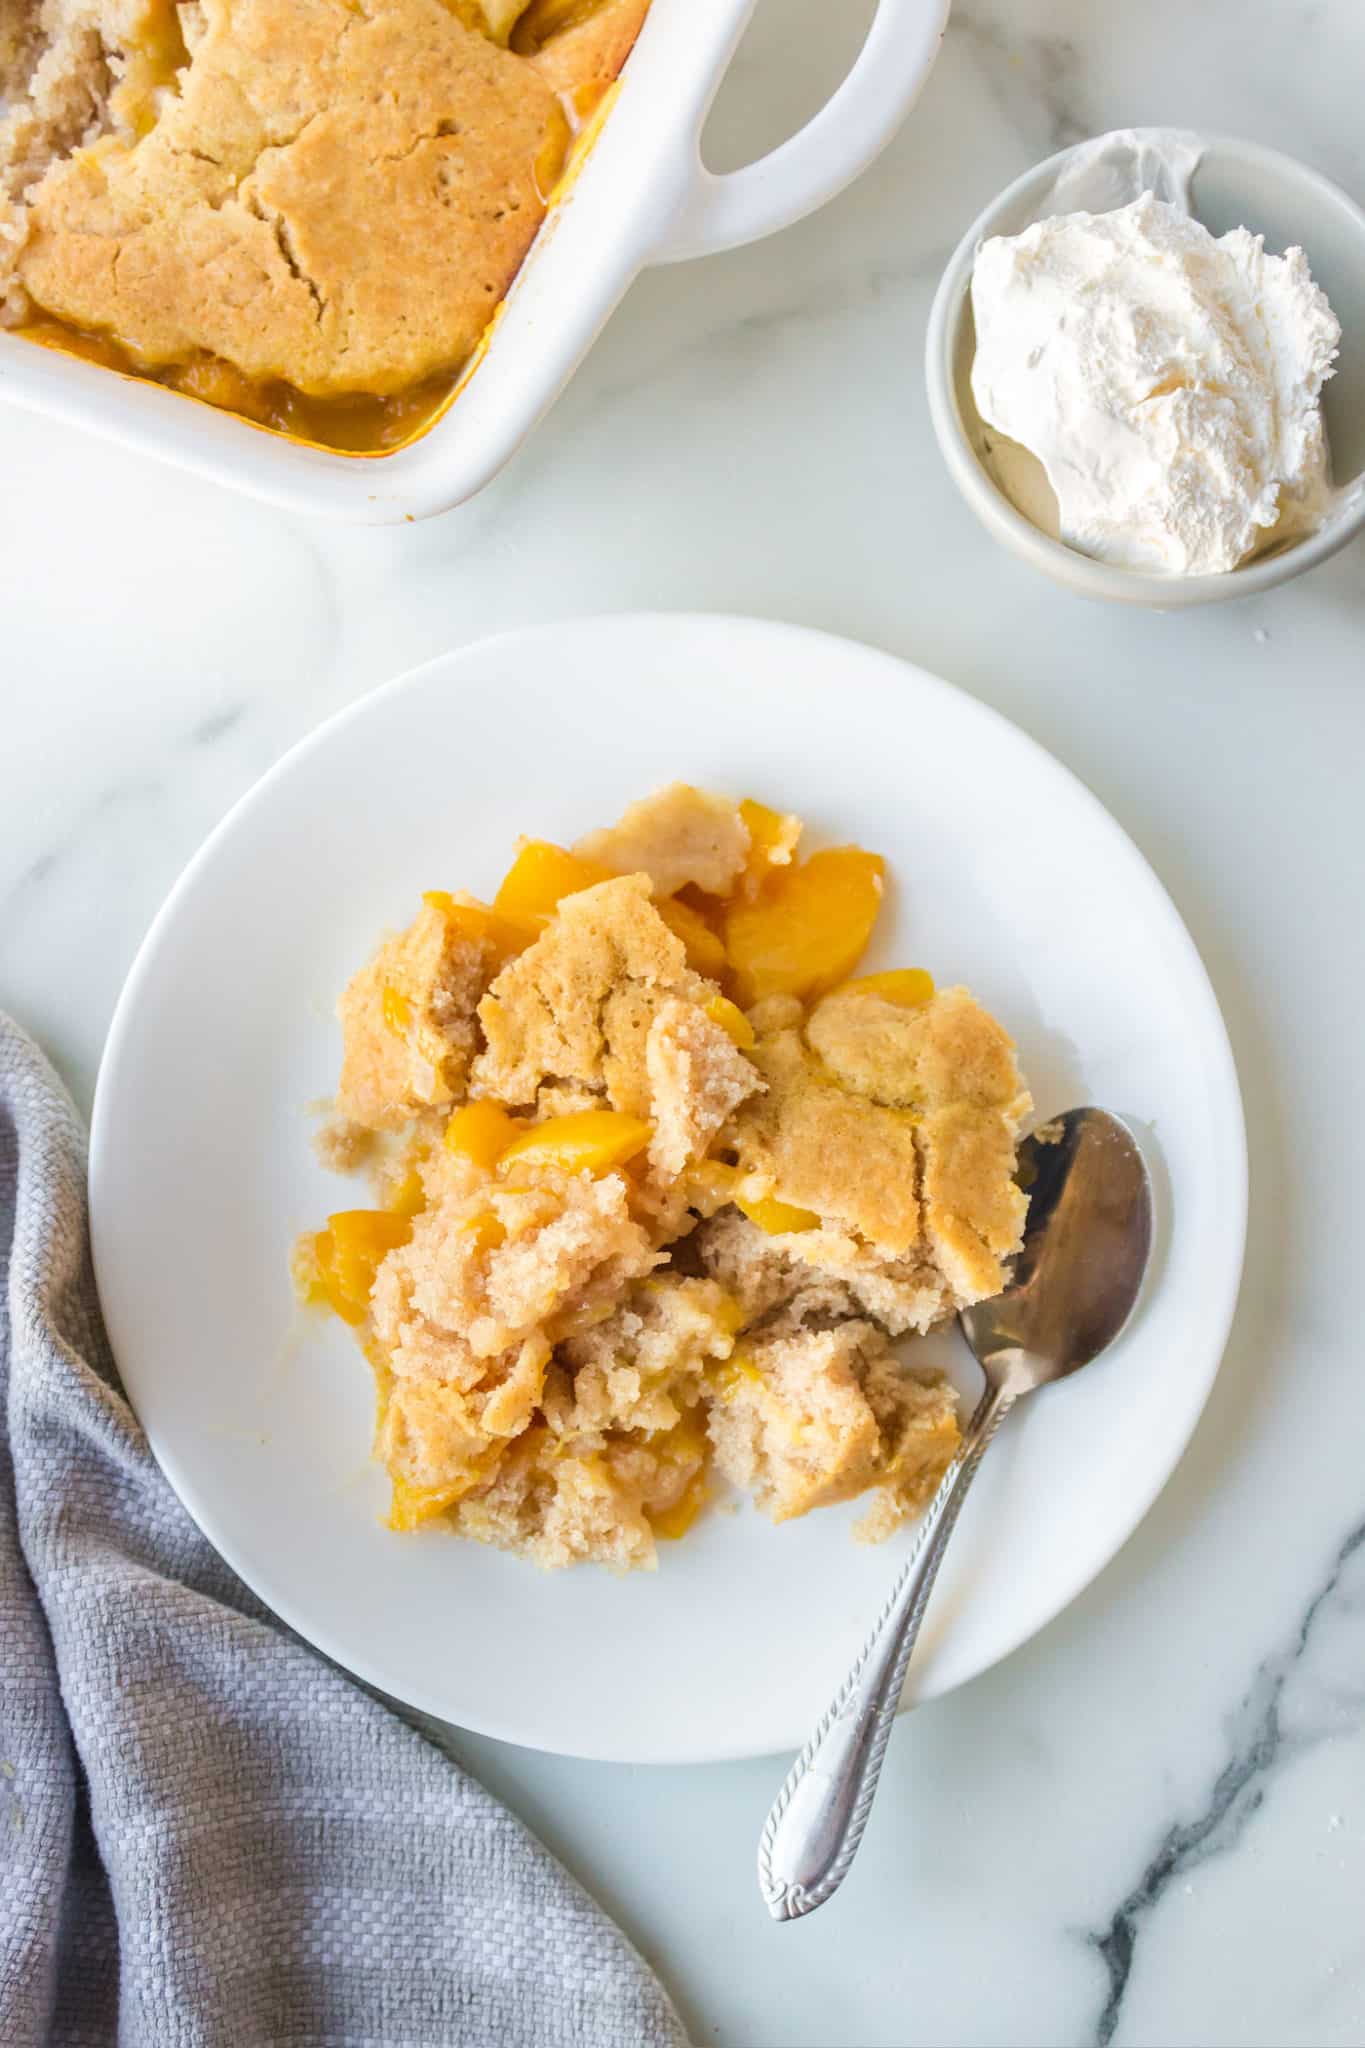 A plate of peach cobbler made with almond flour with a spoon and a napkin.